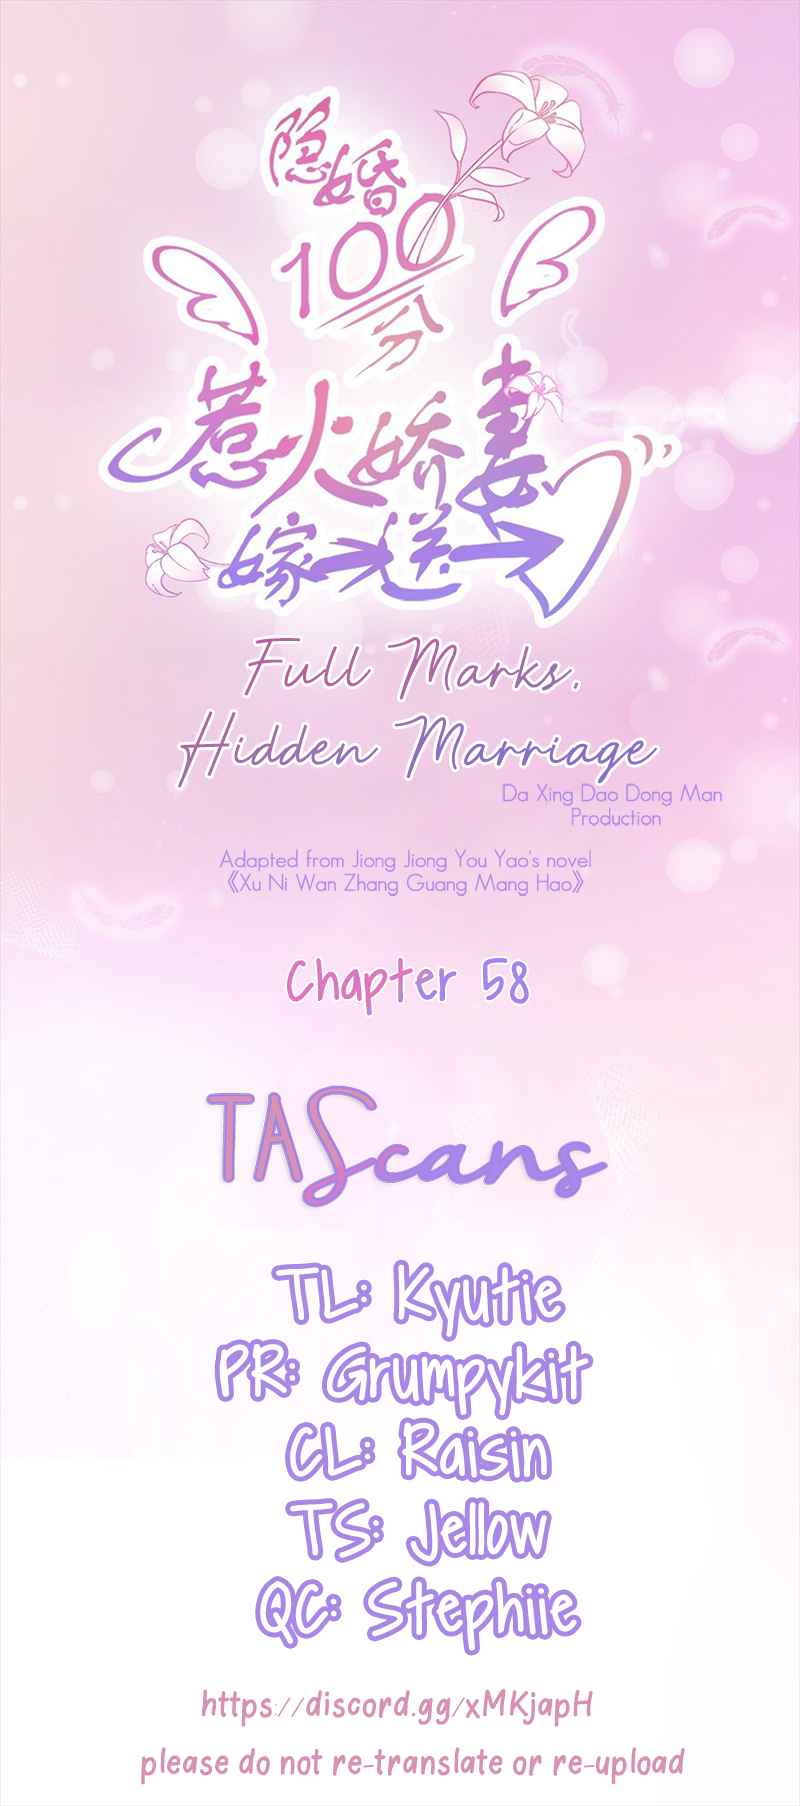 Full Marks, Hidden Marriage Ch. 58 I suggest you reincarnate please.